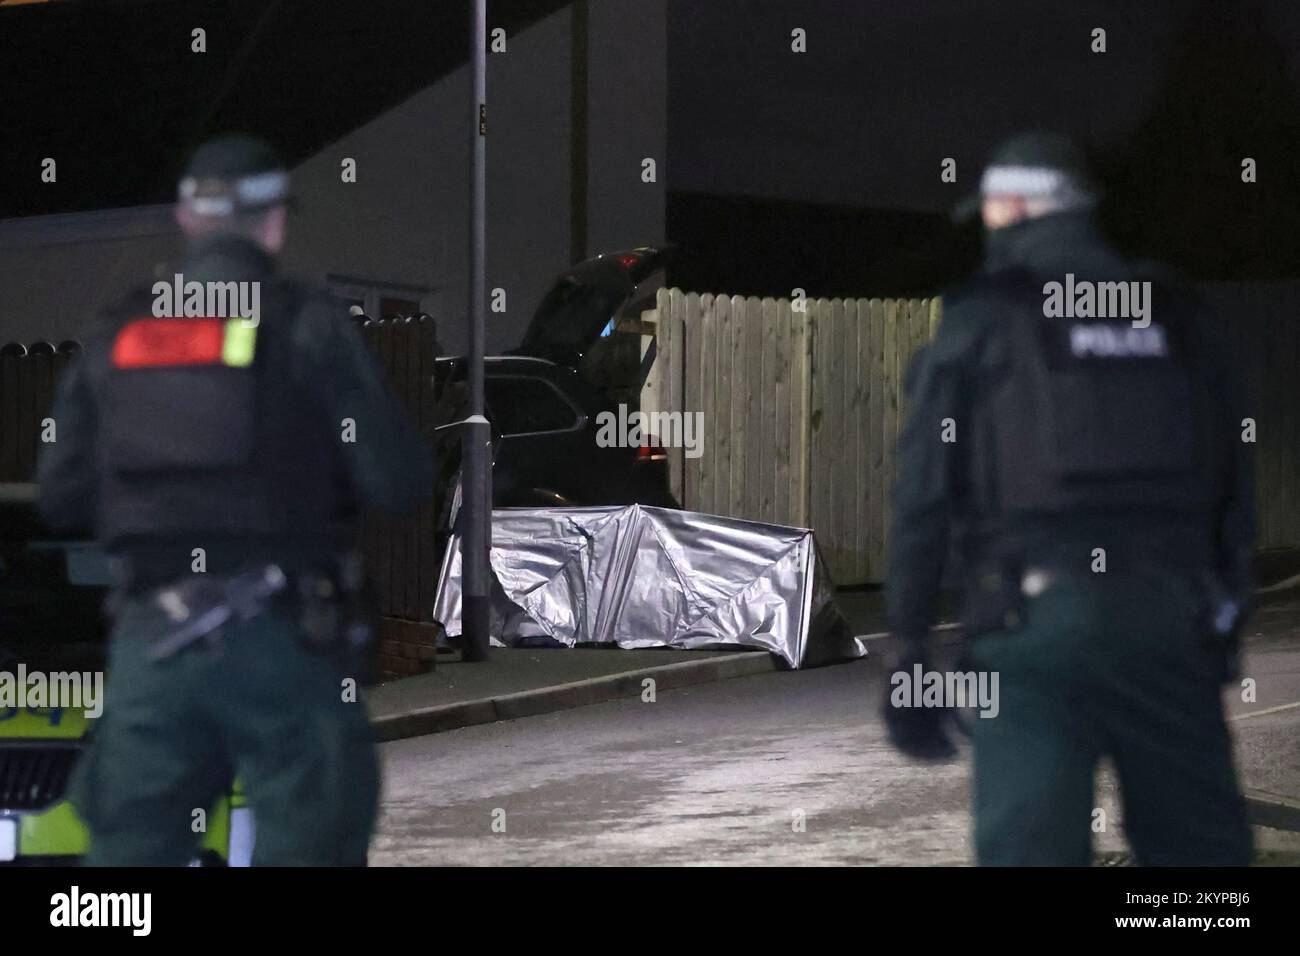 PSNI officers at the scene of a fatal shooting in the Ardcarn Park area of Newry on Thursday evening in which a man died. Stock Photo